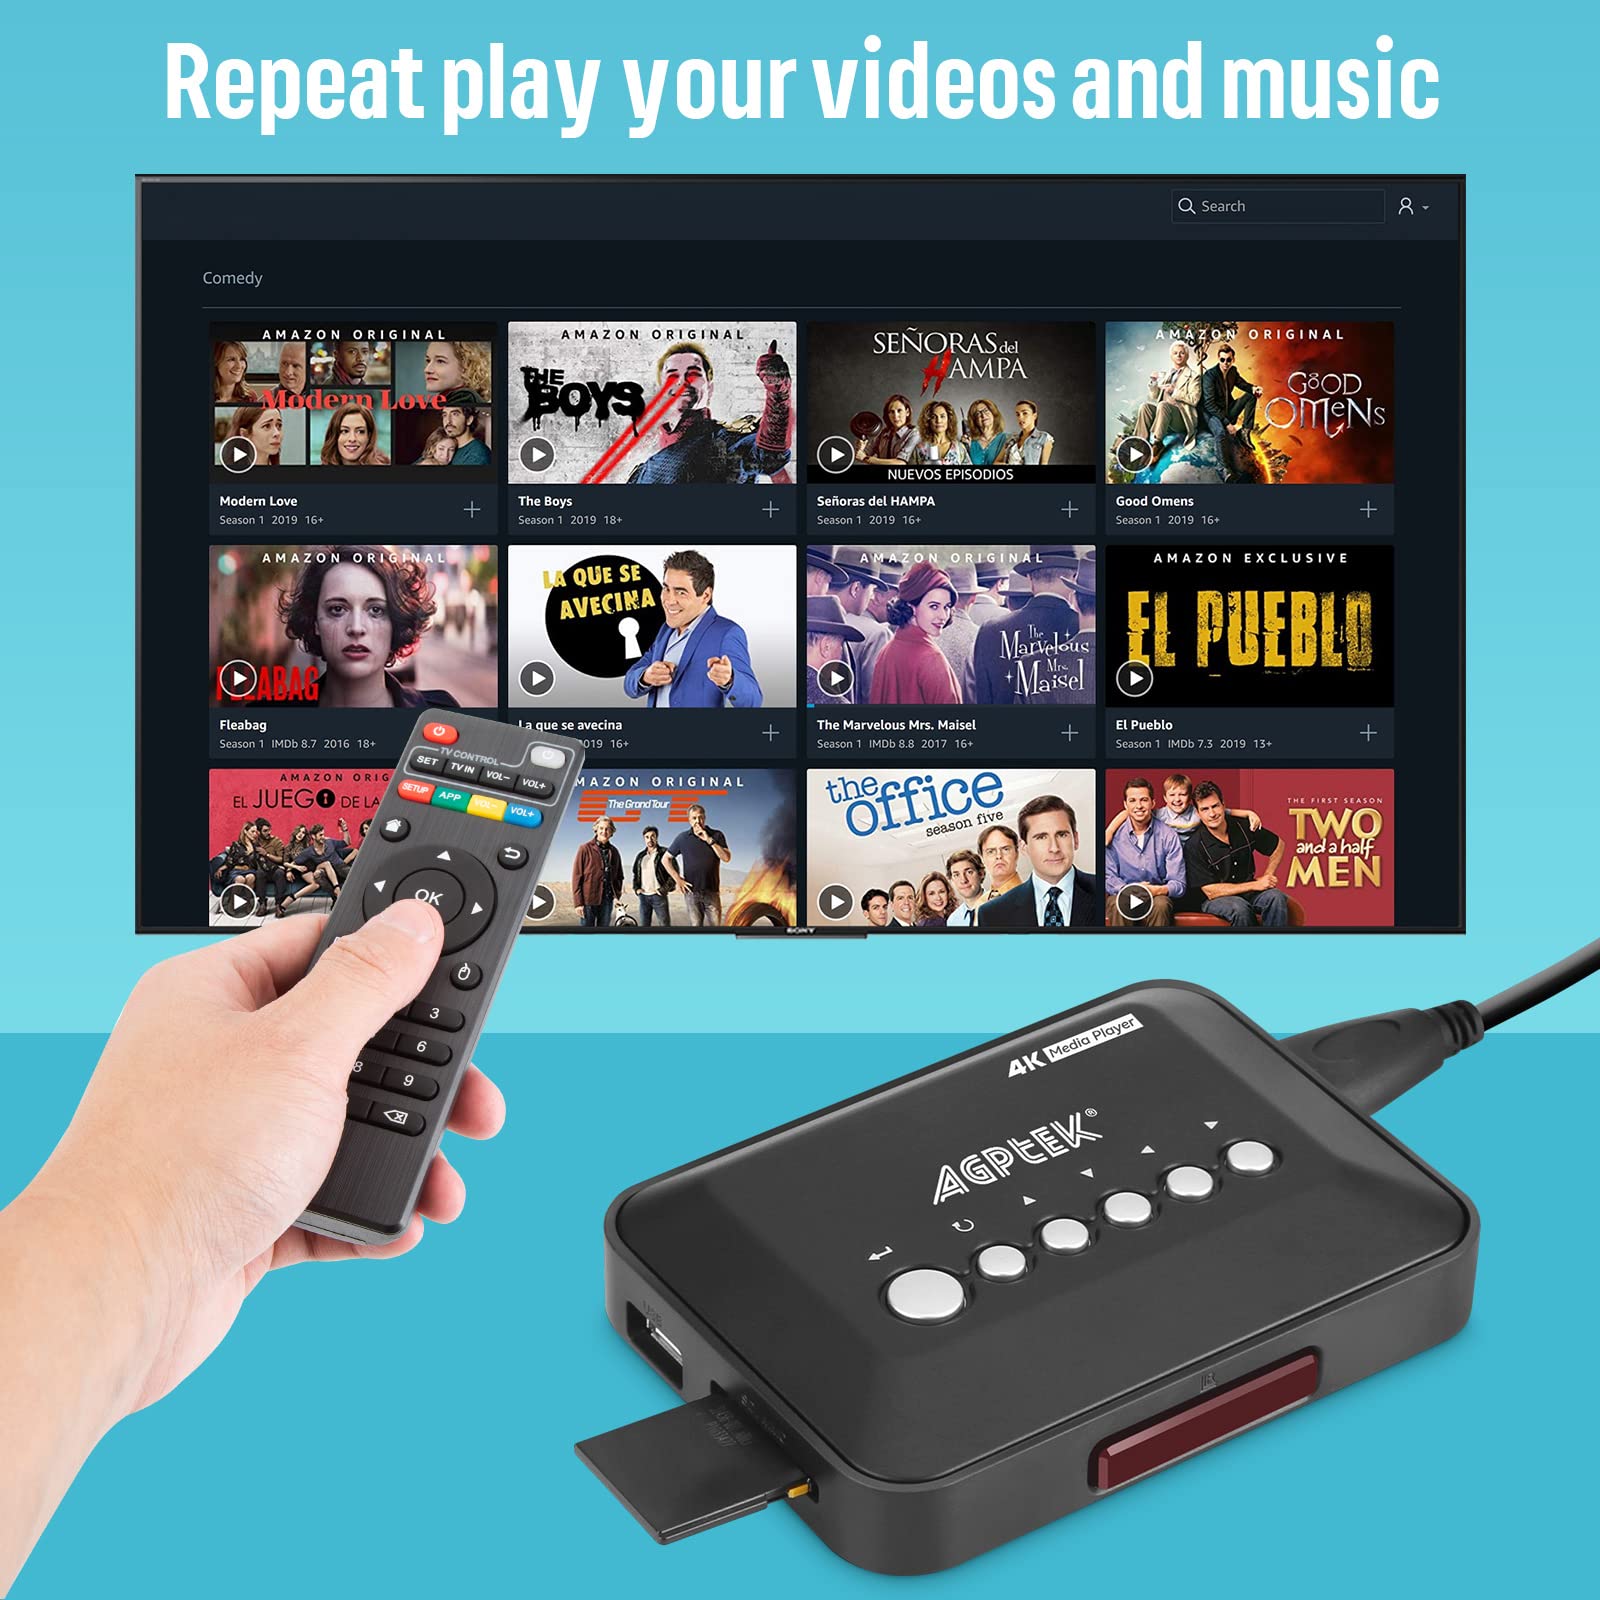 4K@30hz HDMI TV Media Player & A Remote Control, with HDMI/AV Output, Digital MP4 Player for 14TB HDD/ 512G USB Drive/SD Card/H.265 MP4, with Remote Control for MP3 AVI RMVB MPEG etc